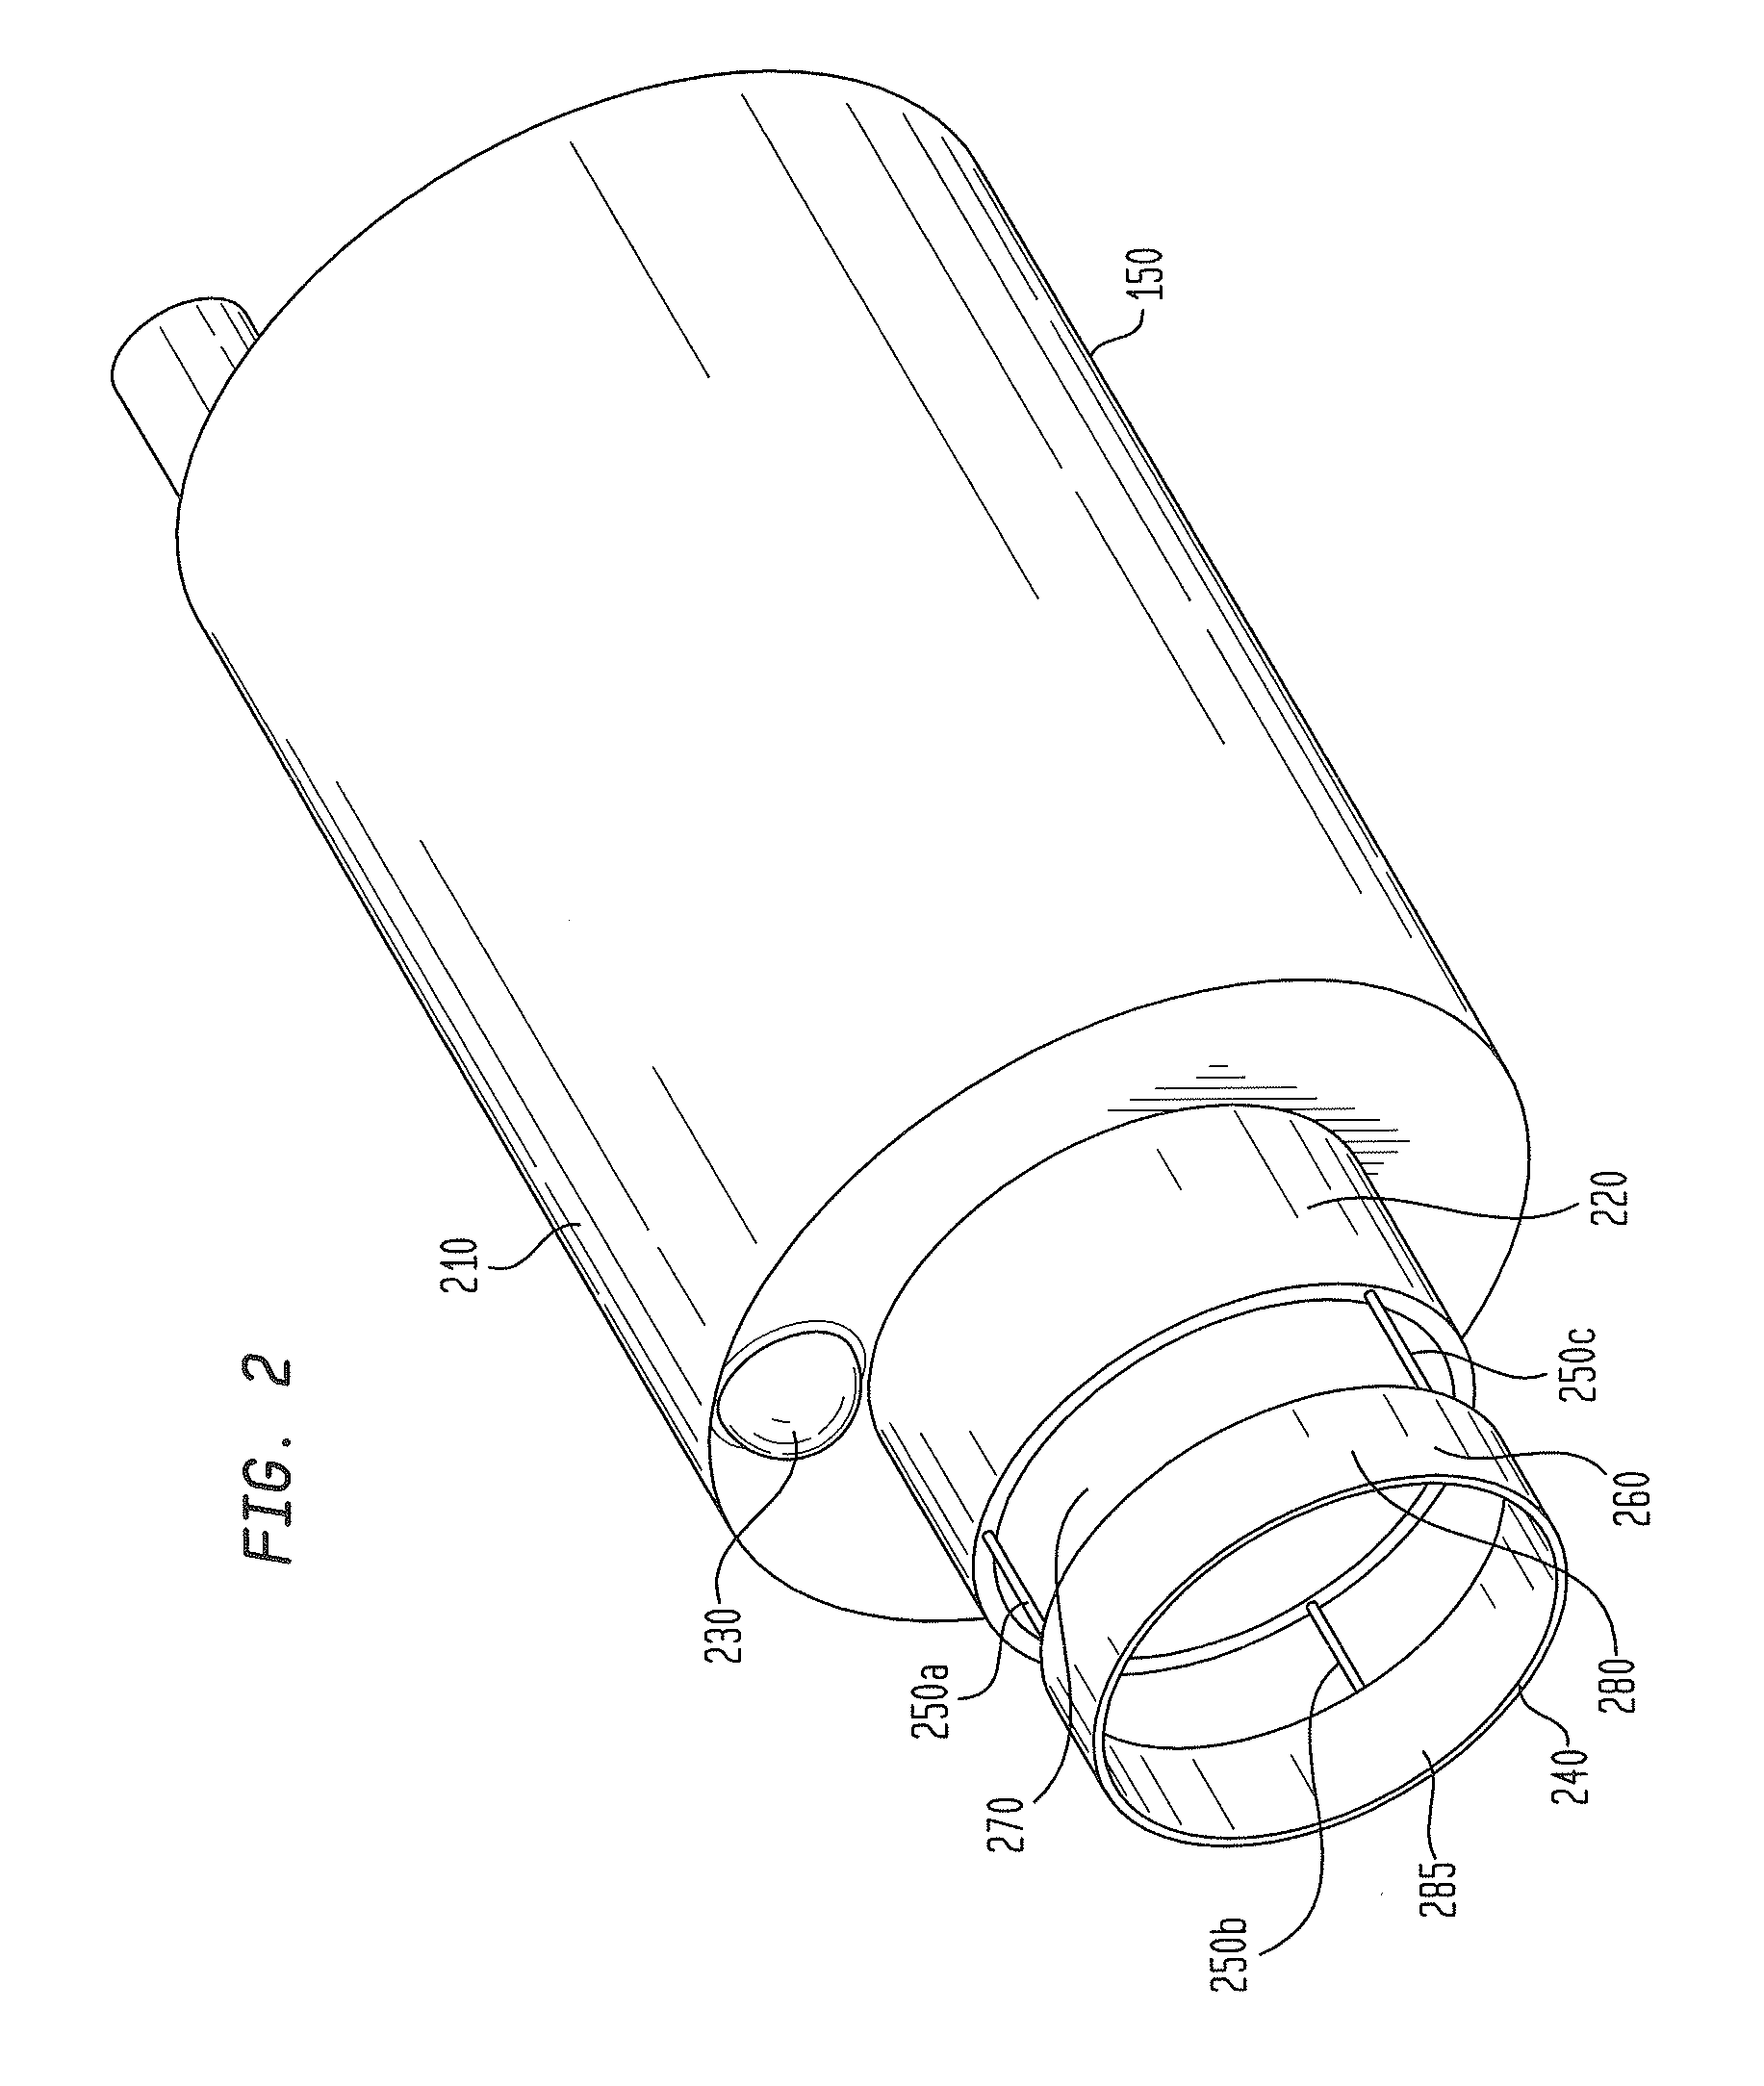 Electrosurgical Cutting Devices